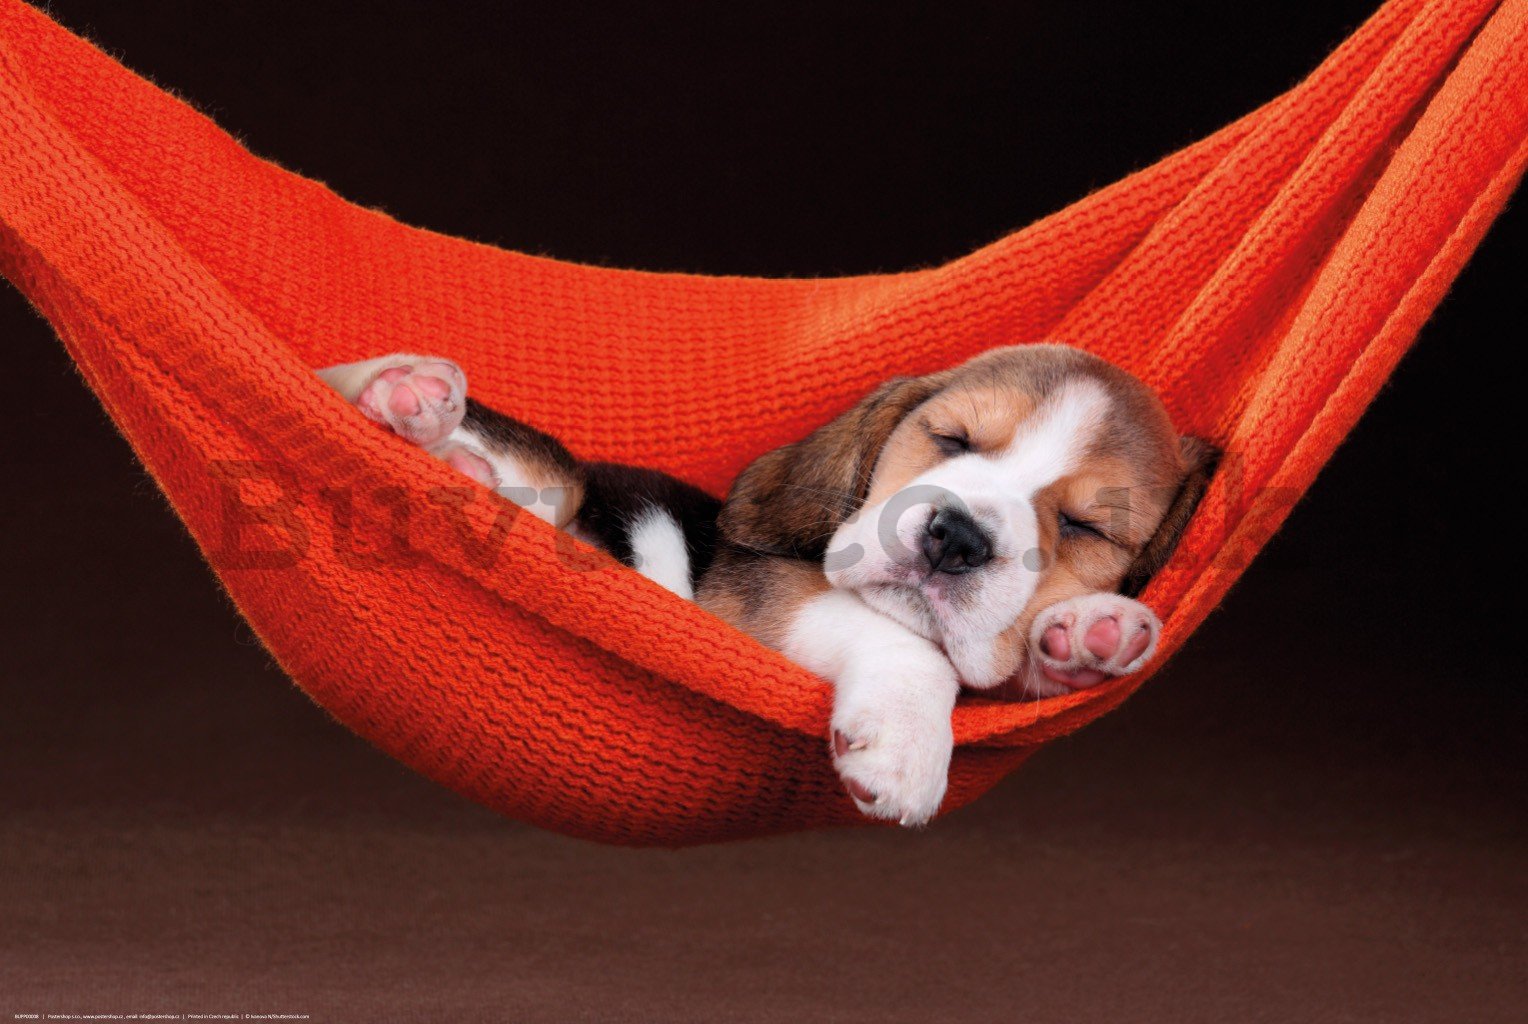 Poster: Puppy in a hammock